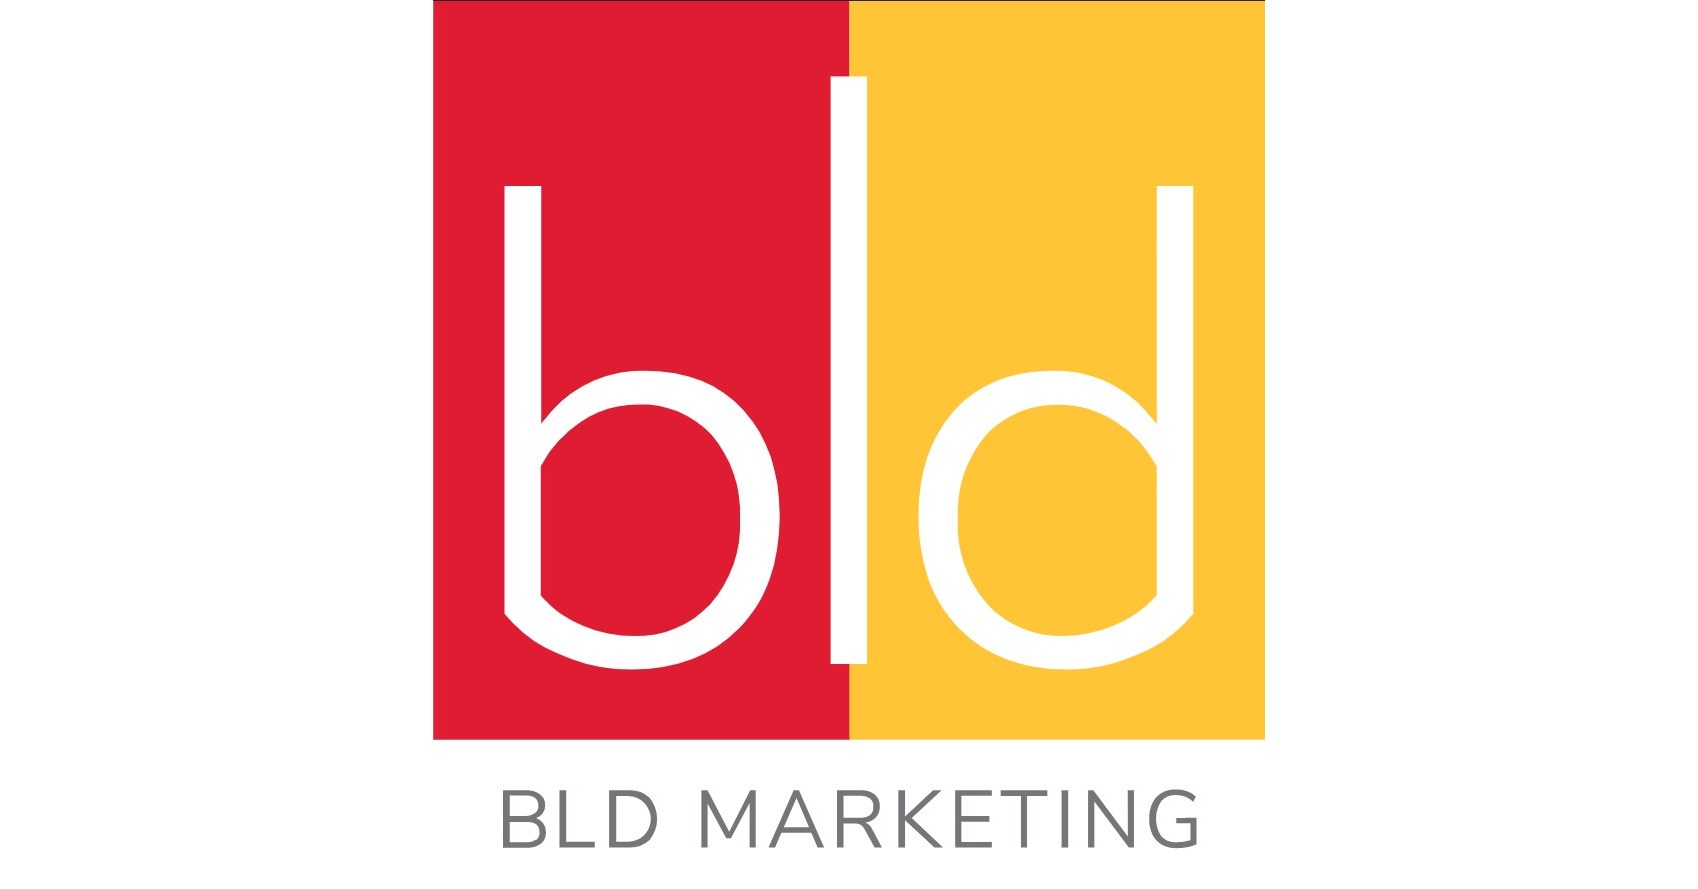 BLD Marketing Generates Ongoing Growth, Prepares for 2023 Office Expansion to Accommodate Momentum